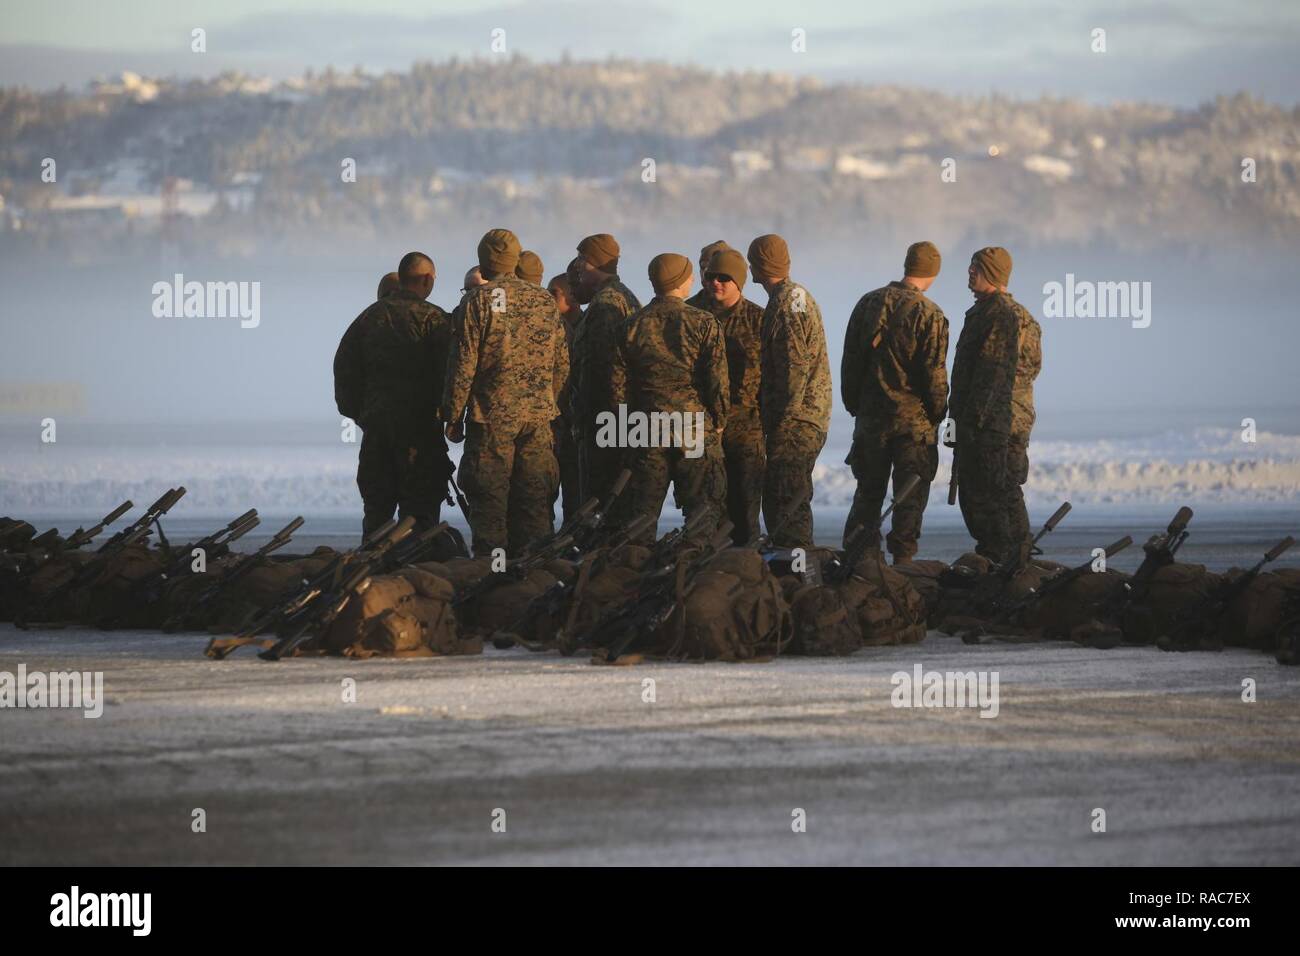 U.S. Marines stage their gear before unloading bags from the plane at Vaernes Garnison, Norway, Jan. 16, 2017. The Marines with Black Sea Rotational Force 17.1 arrived at Vaernes Garnison early in the morning as part of Marine Rotational Force Europe 17.1. Stock Photo